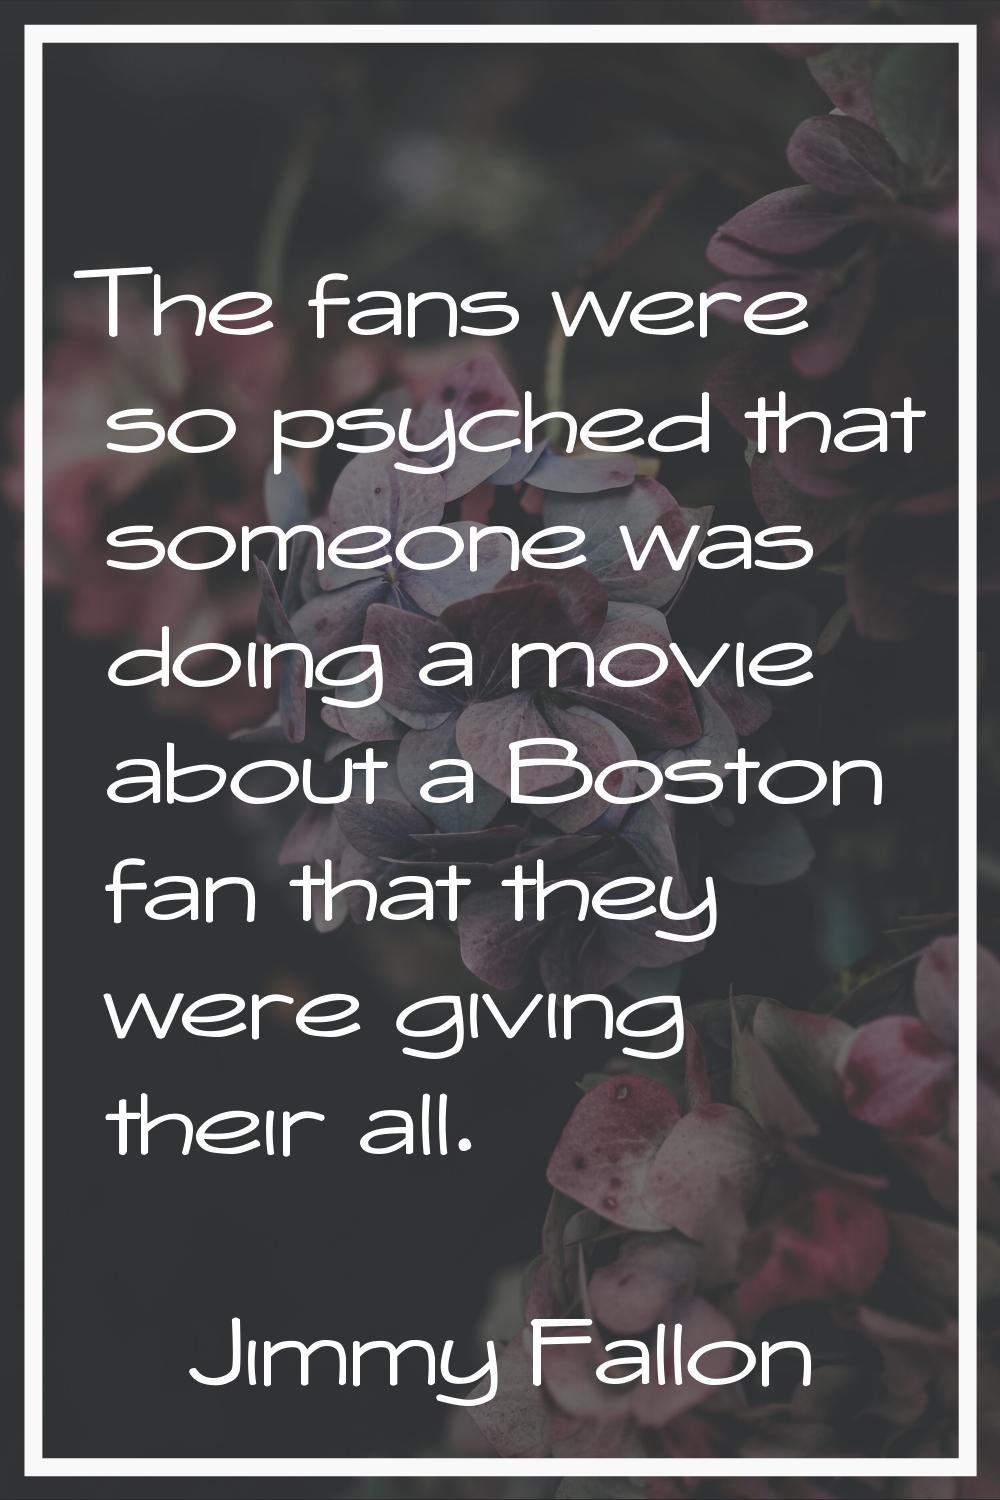 The fans were so psyched that someone was doing a movie about a Boston fan that they were giving th